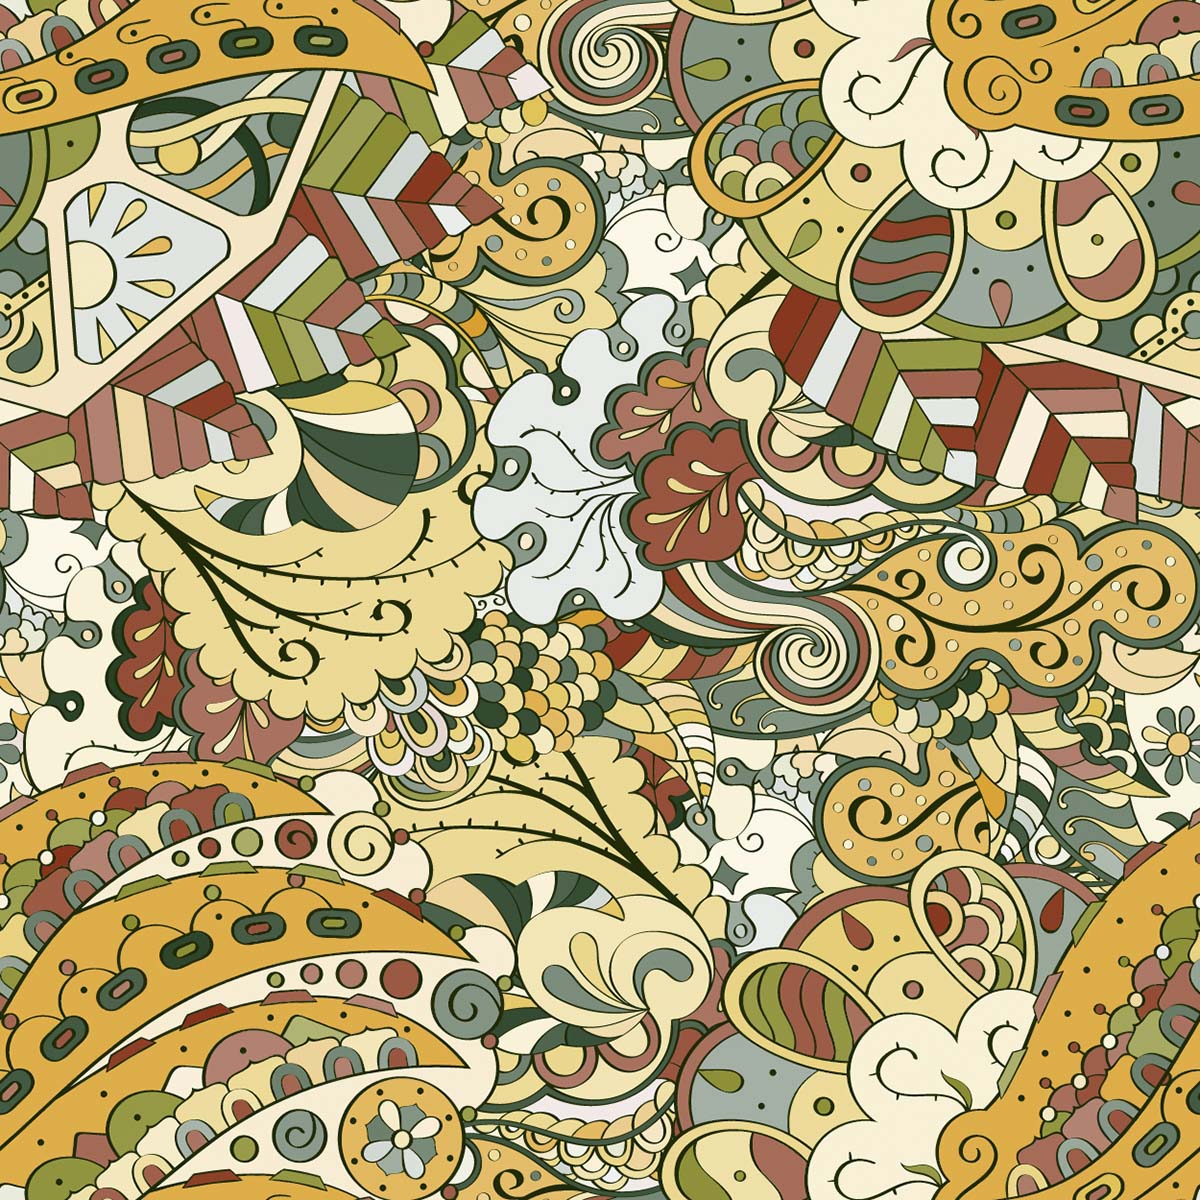 A colorful pattern with swirls